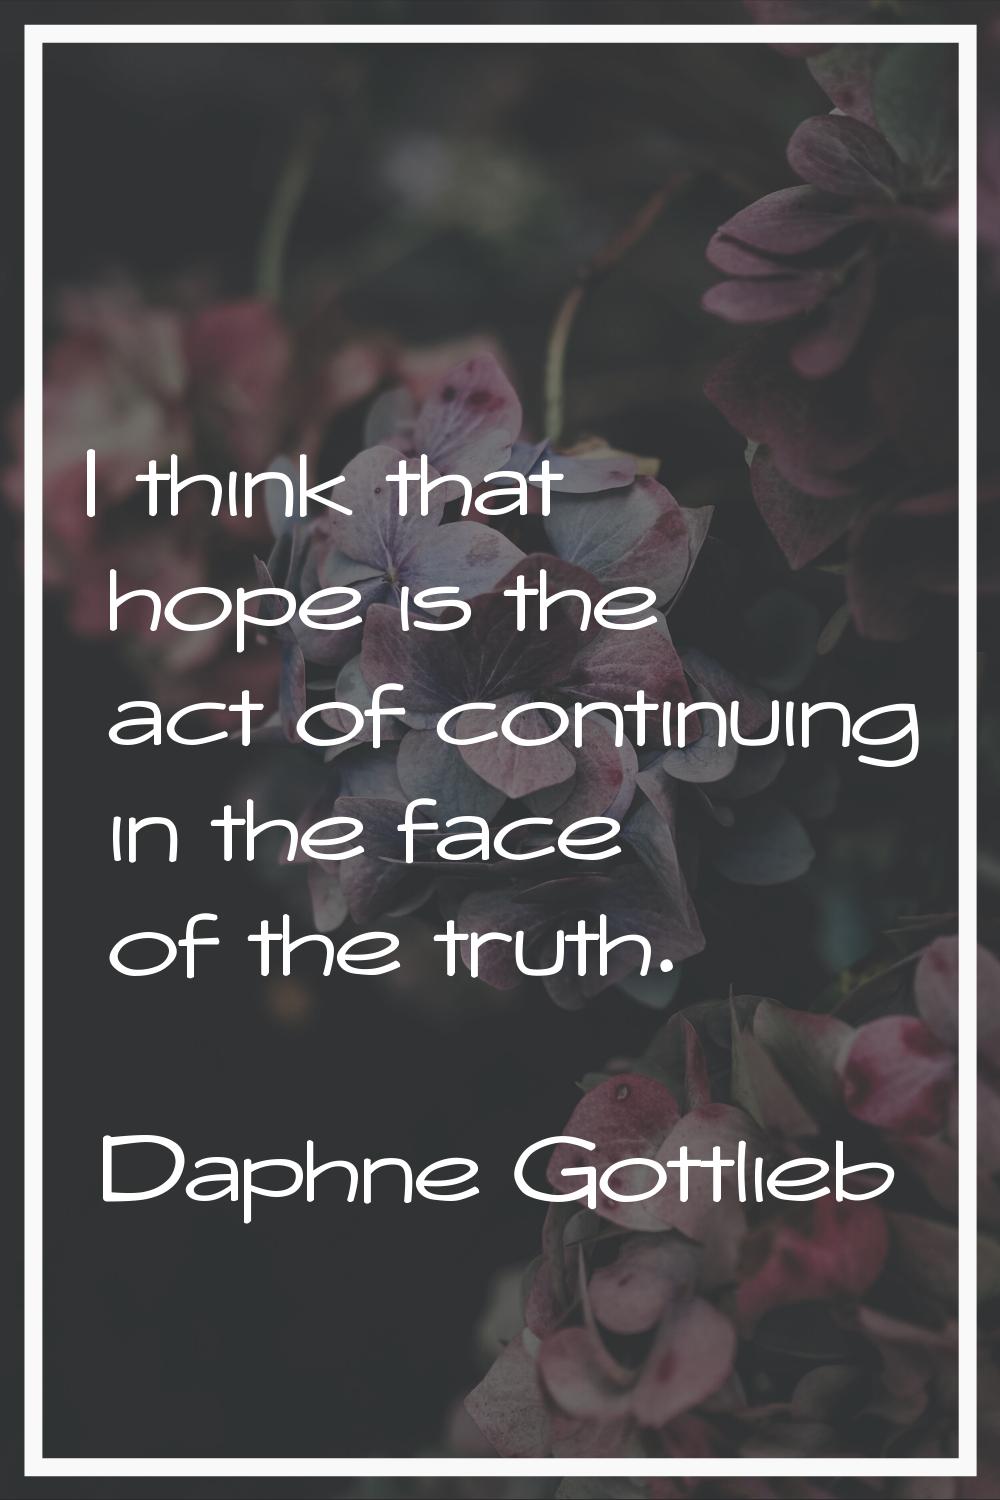 I think that hope is the act of continuing in the face of the truth.